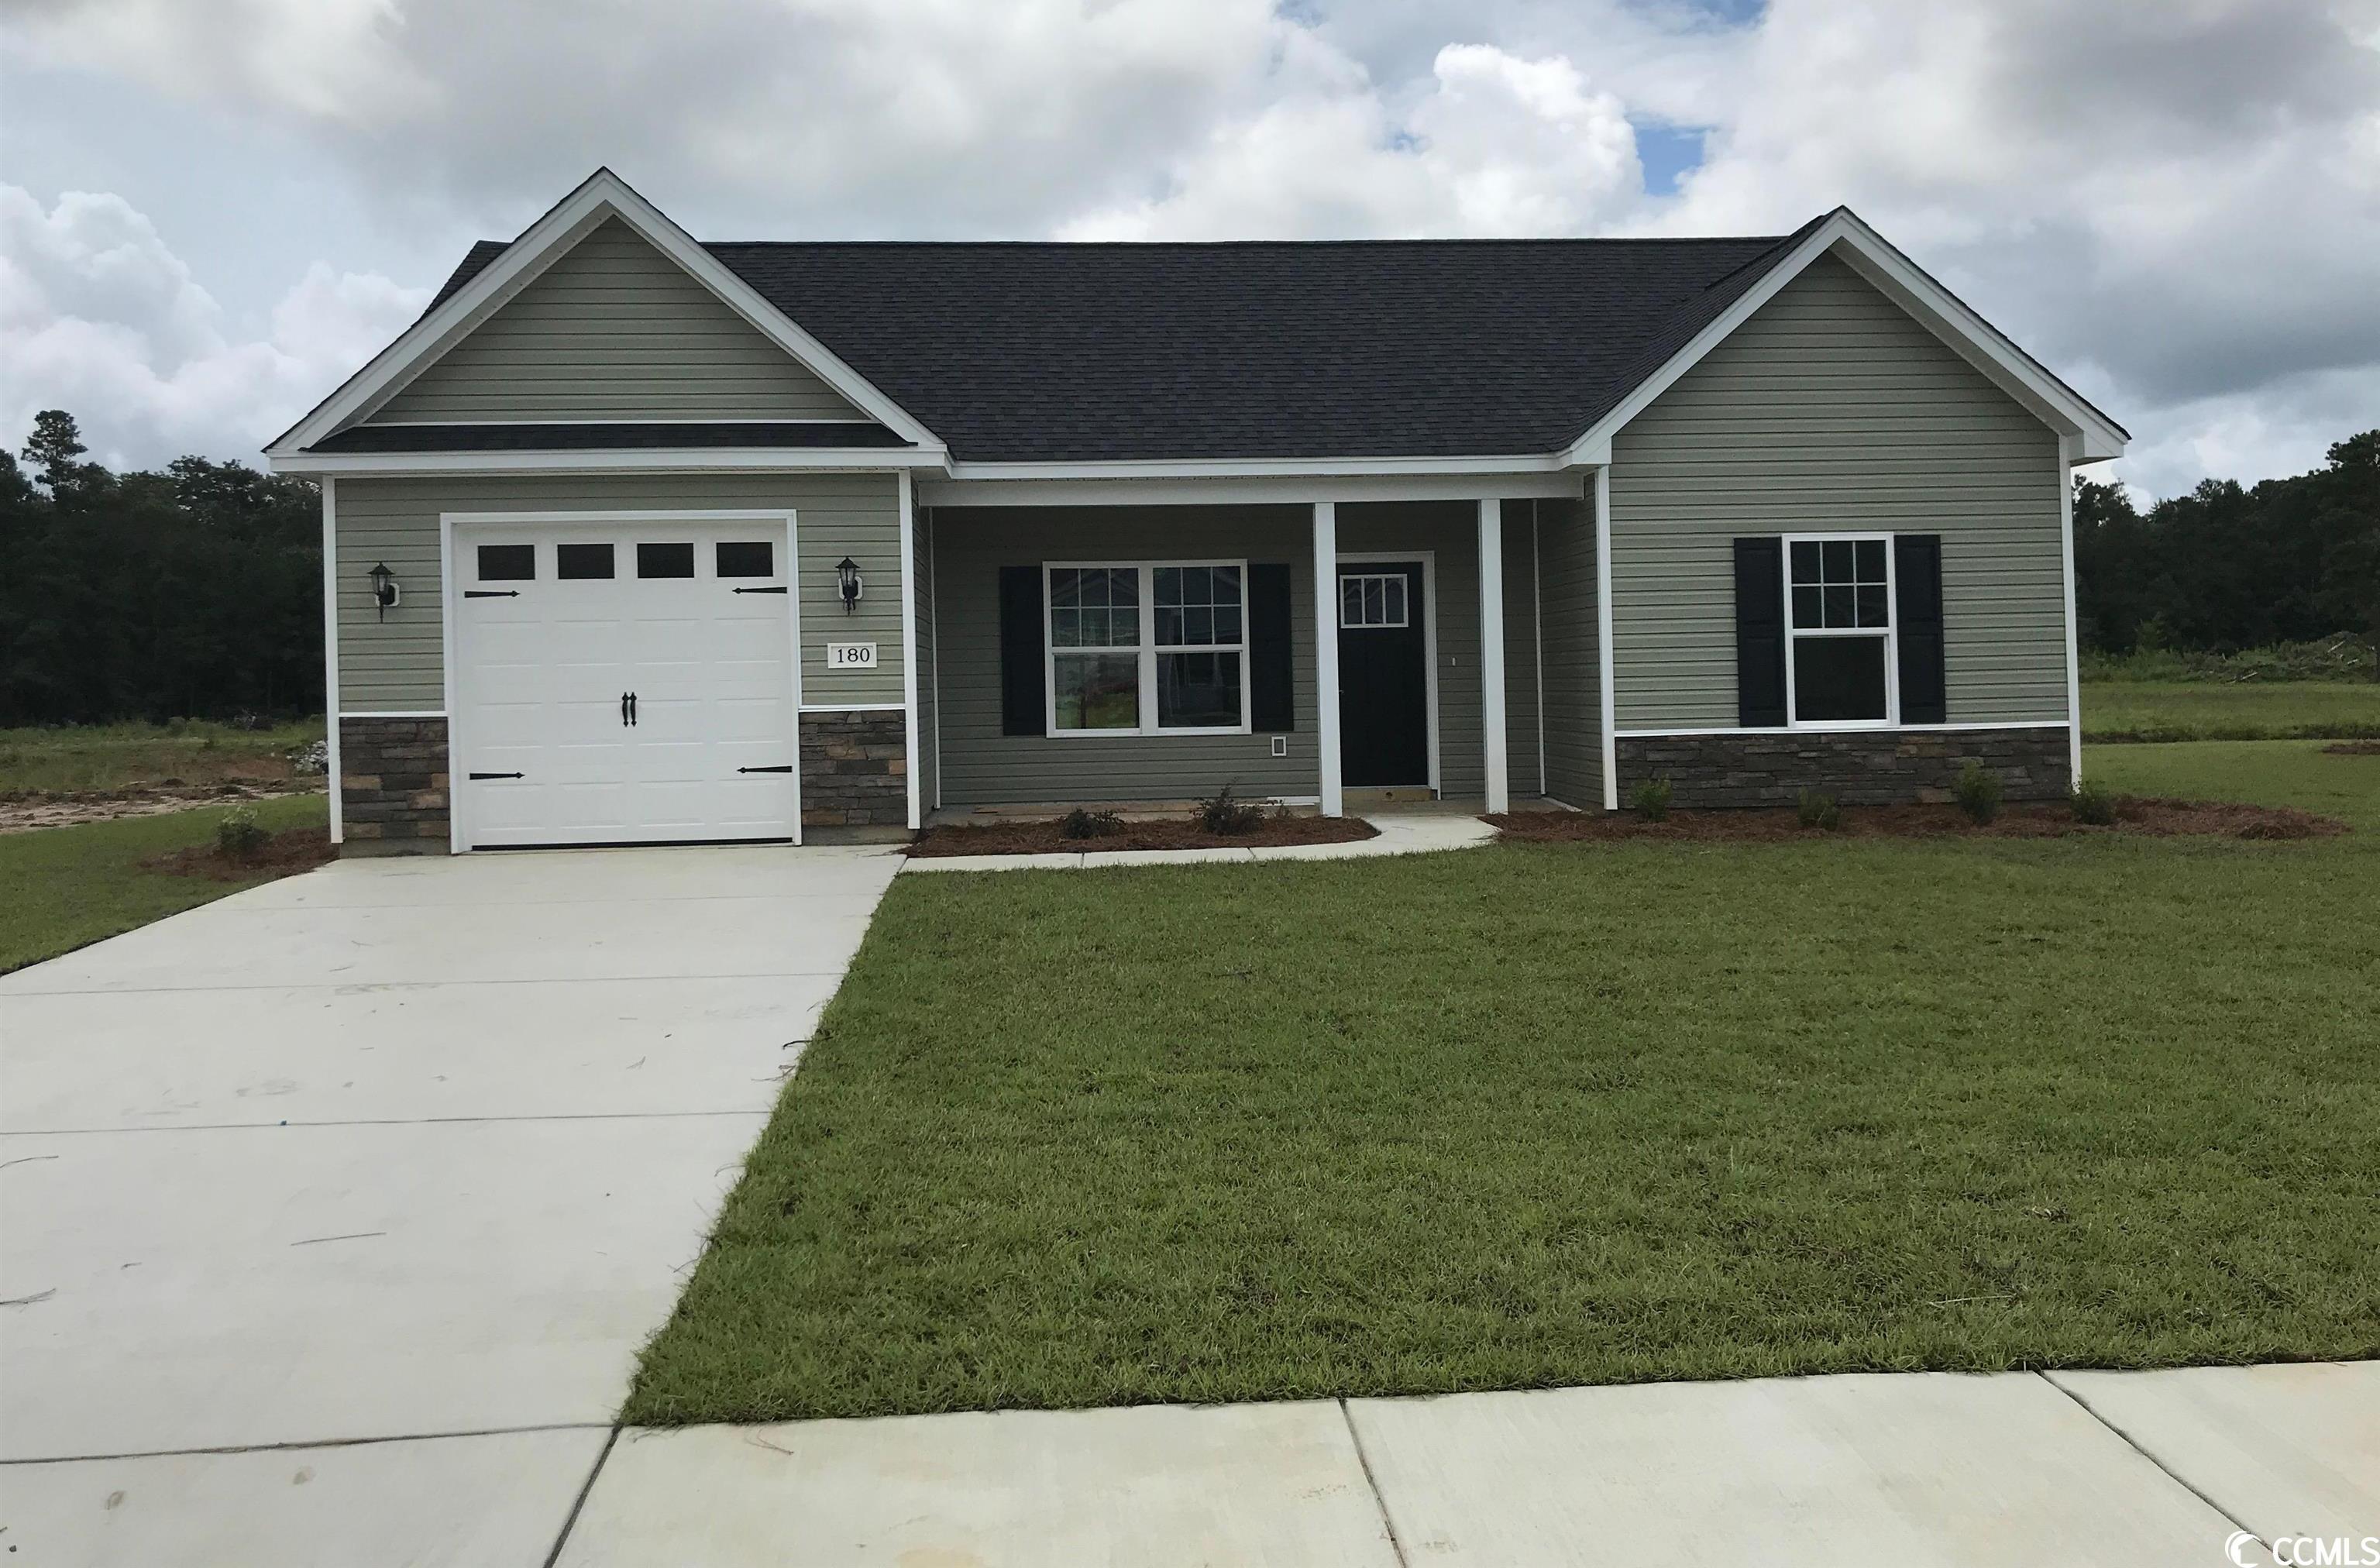 Photo one of 410 Shallow Cove Dr. Conway SC 29527 | MLS 2402019